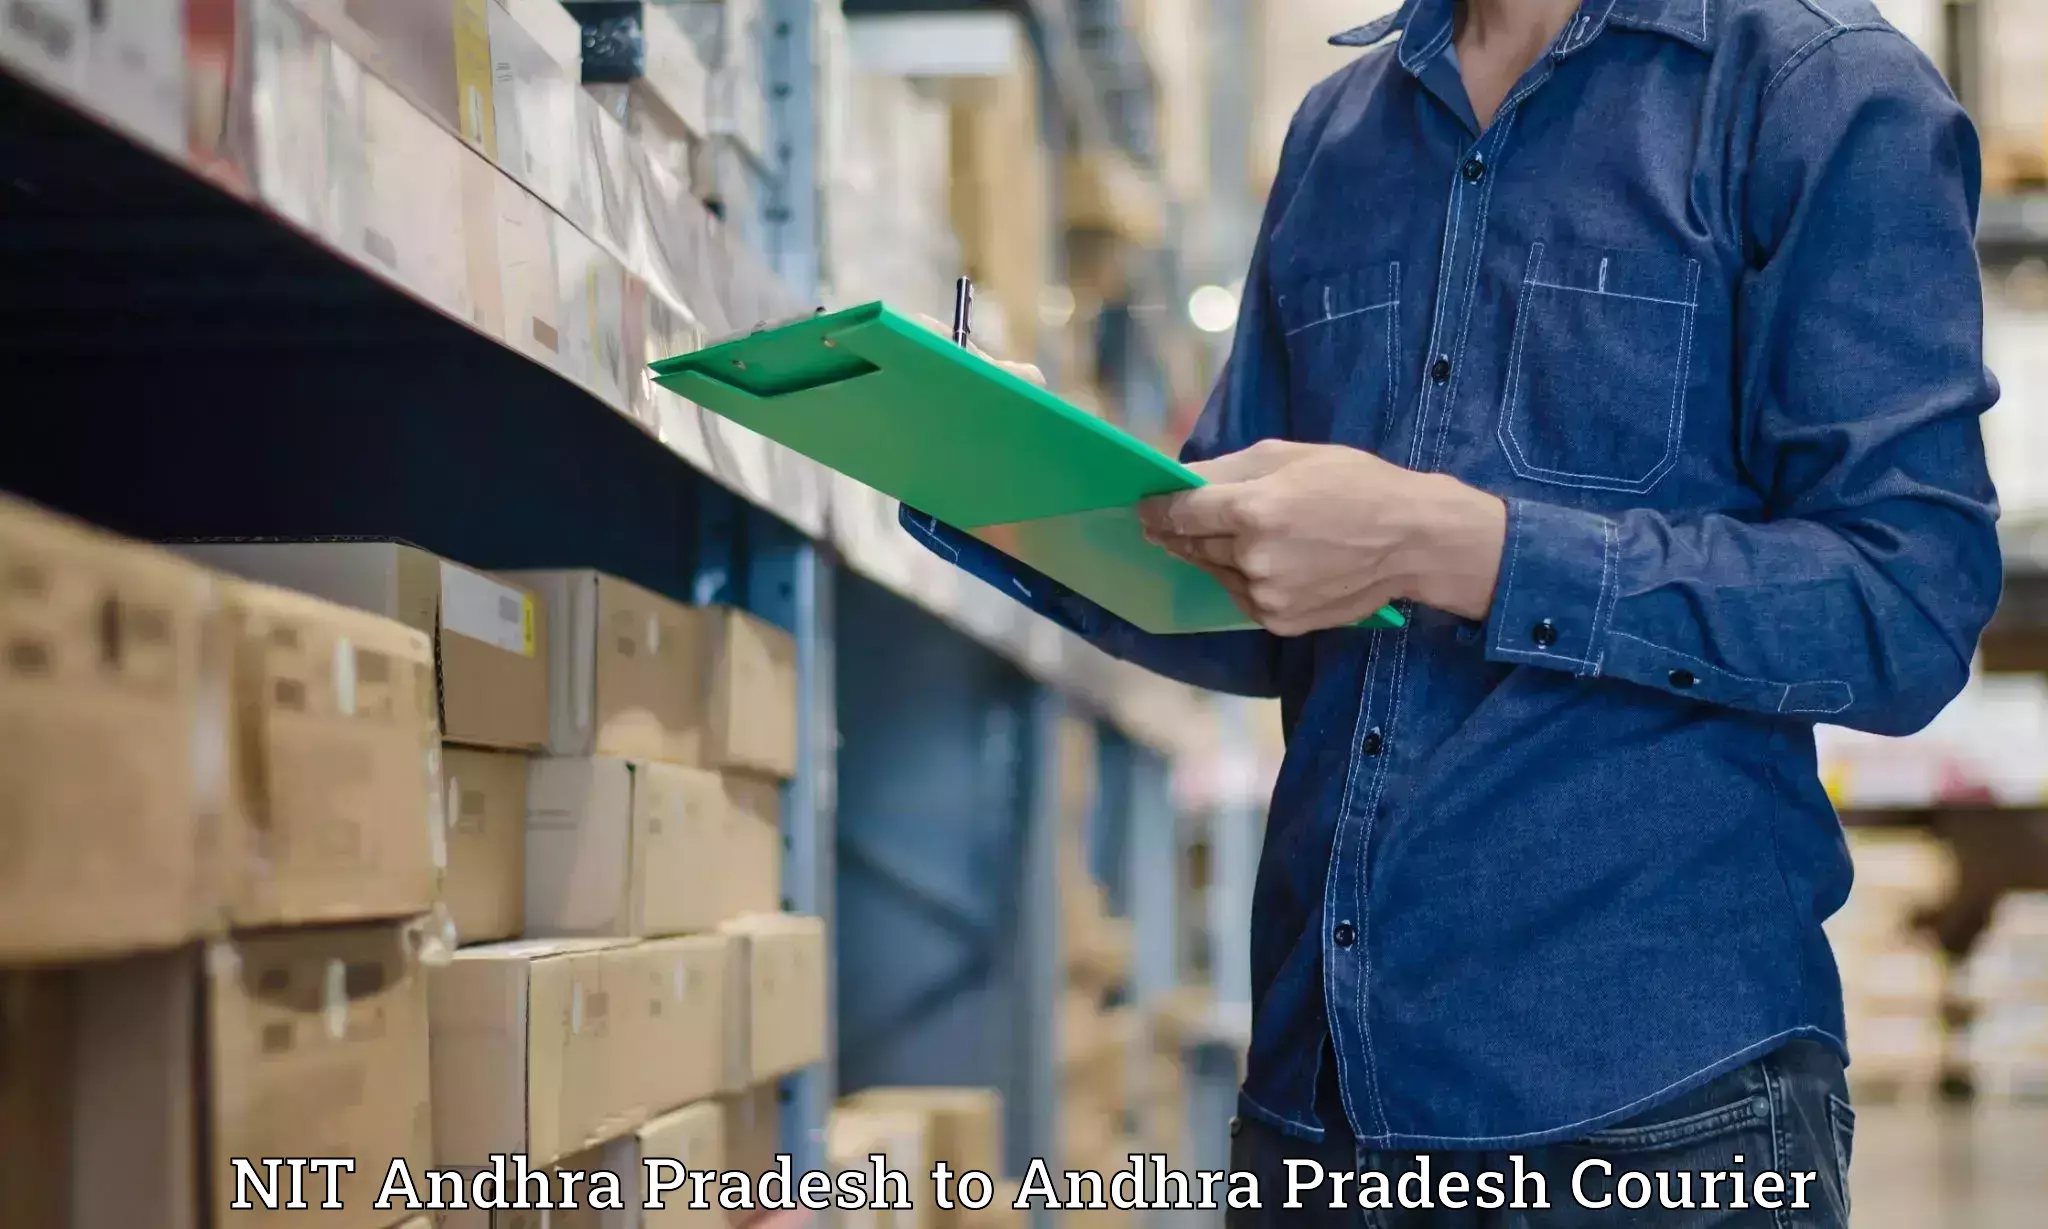 Special handling courier NIT Andhra Pradesh to Changaroth